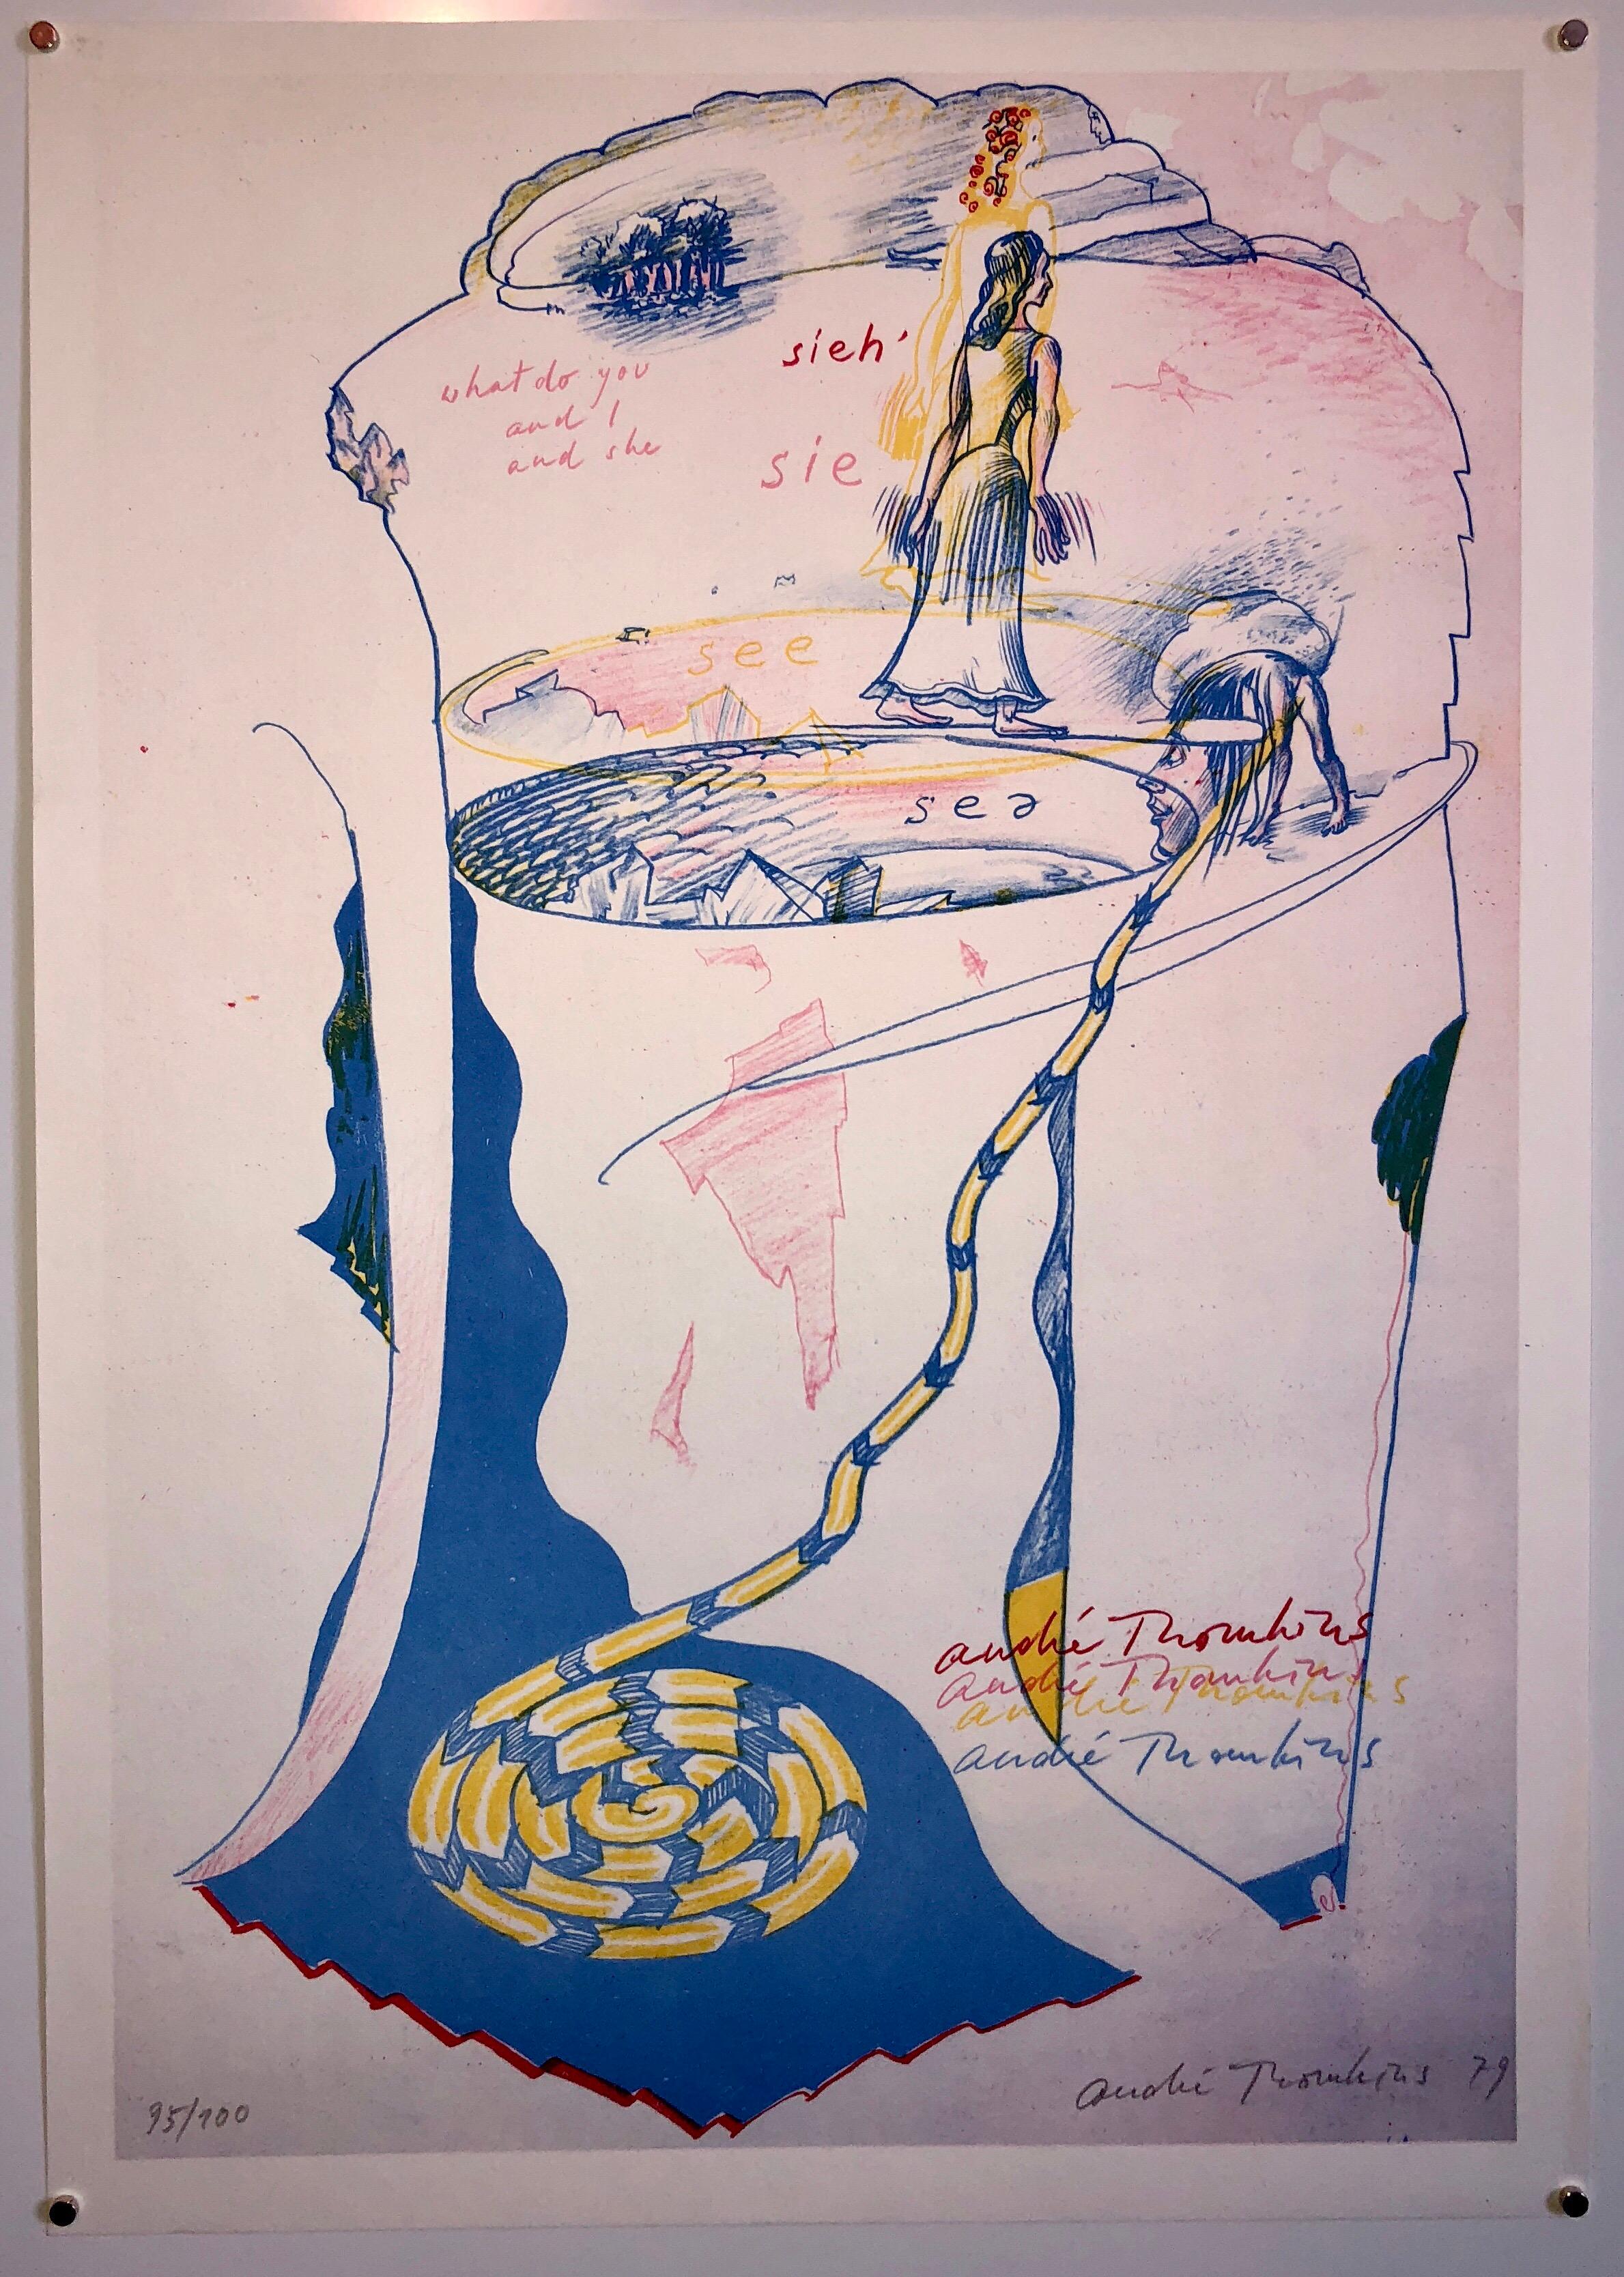 1970s Modernist Swiss Colorful Surrealism Signed Dada Lithograph Andre Thomkins For Sale 2